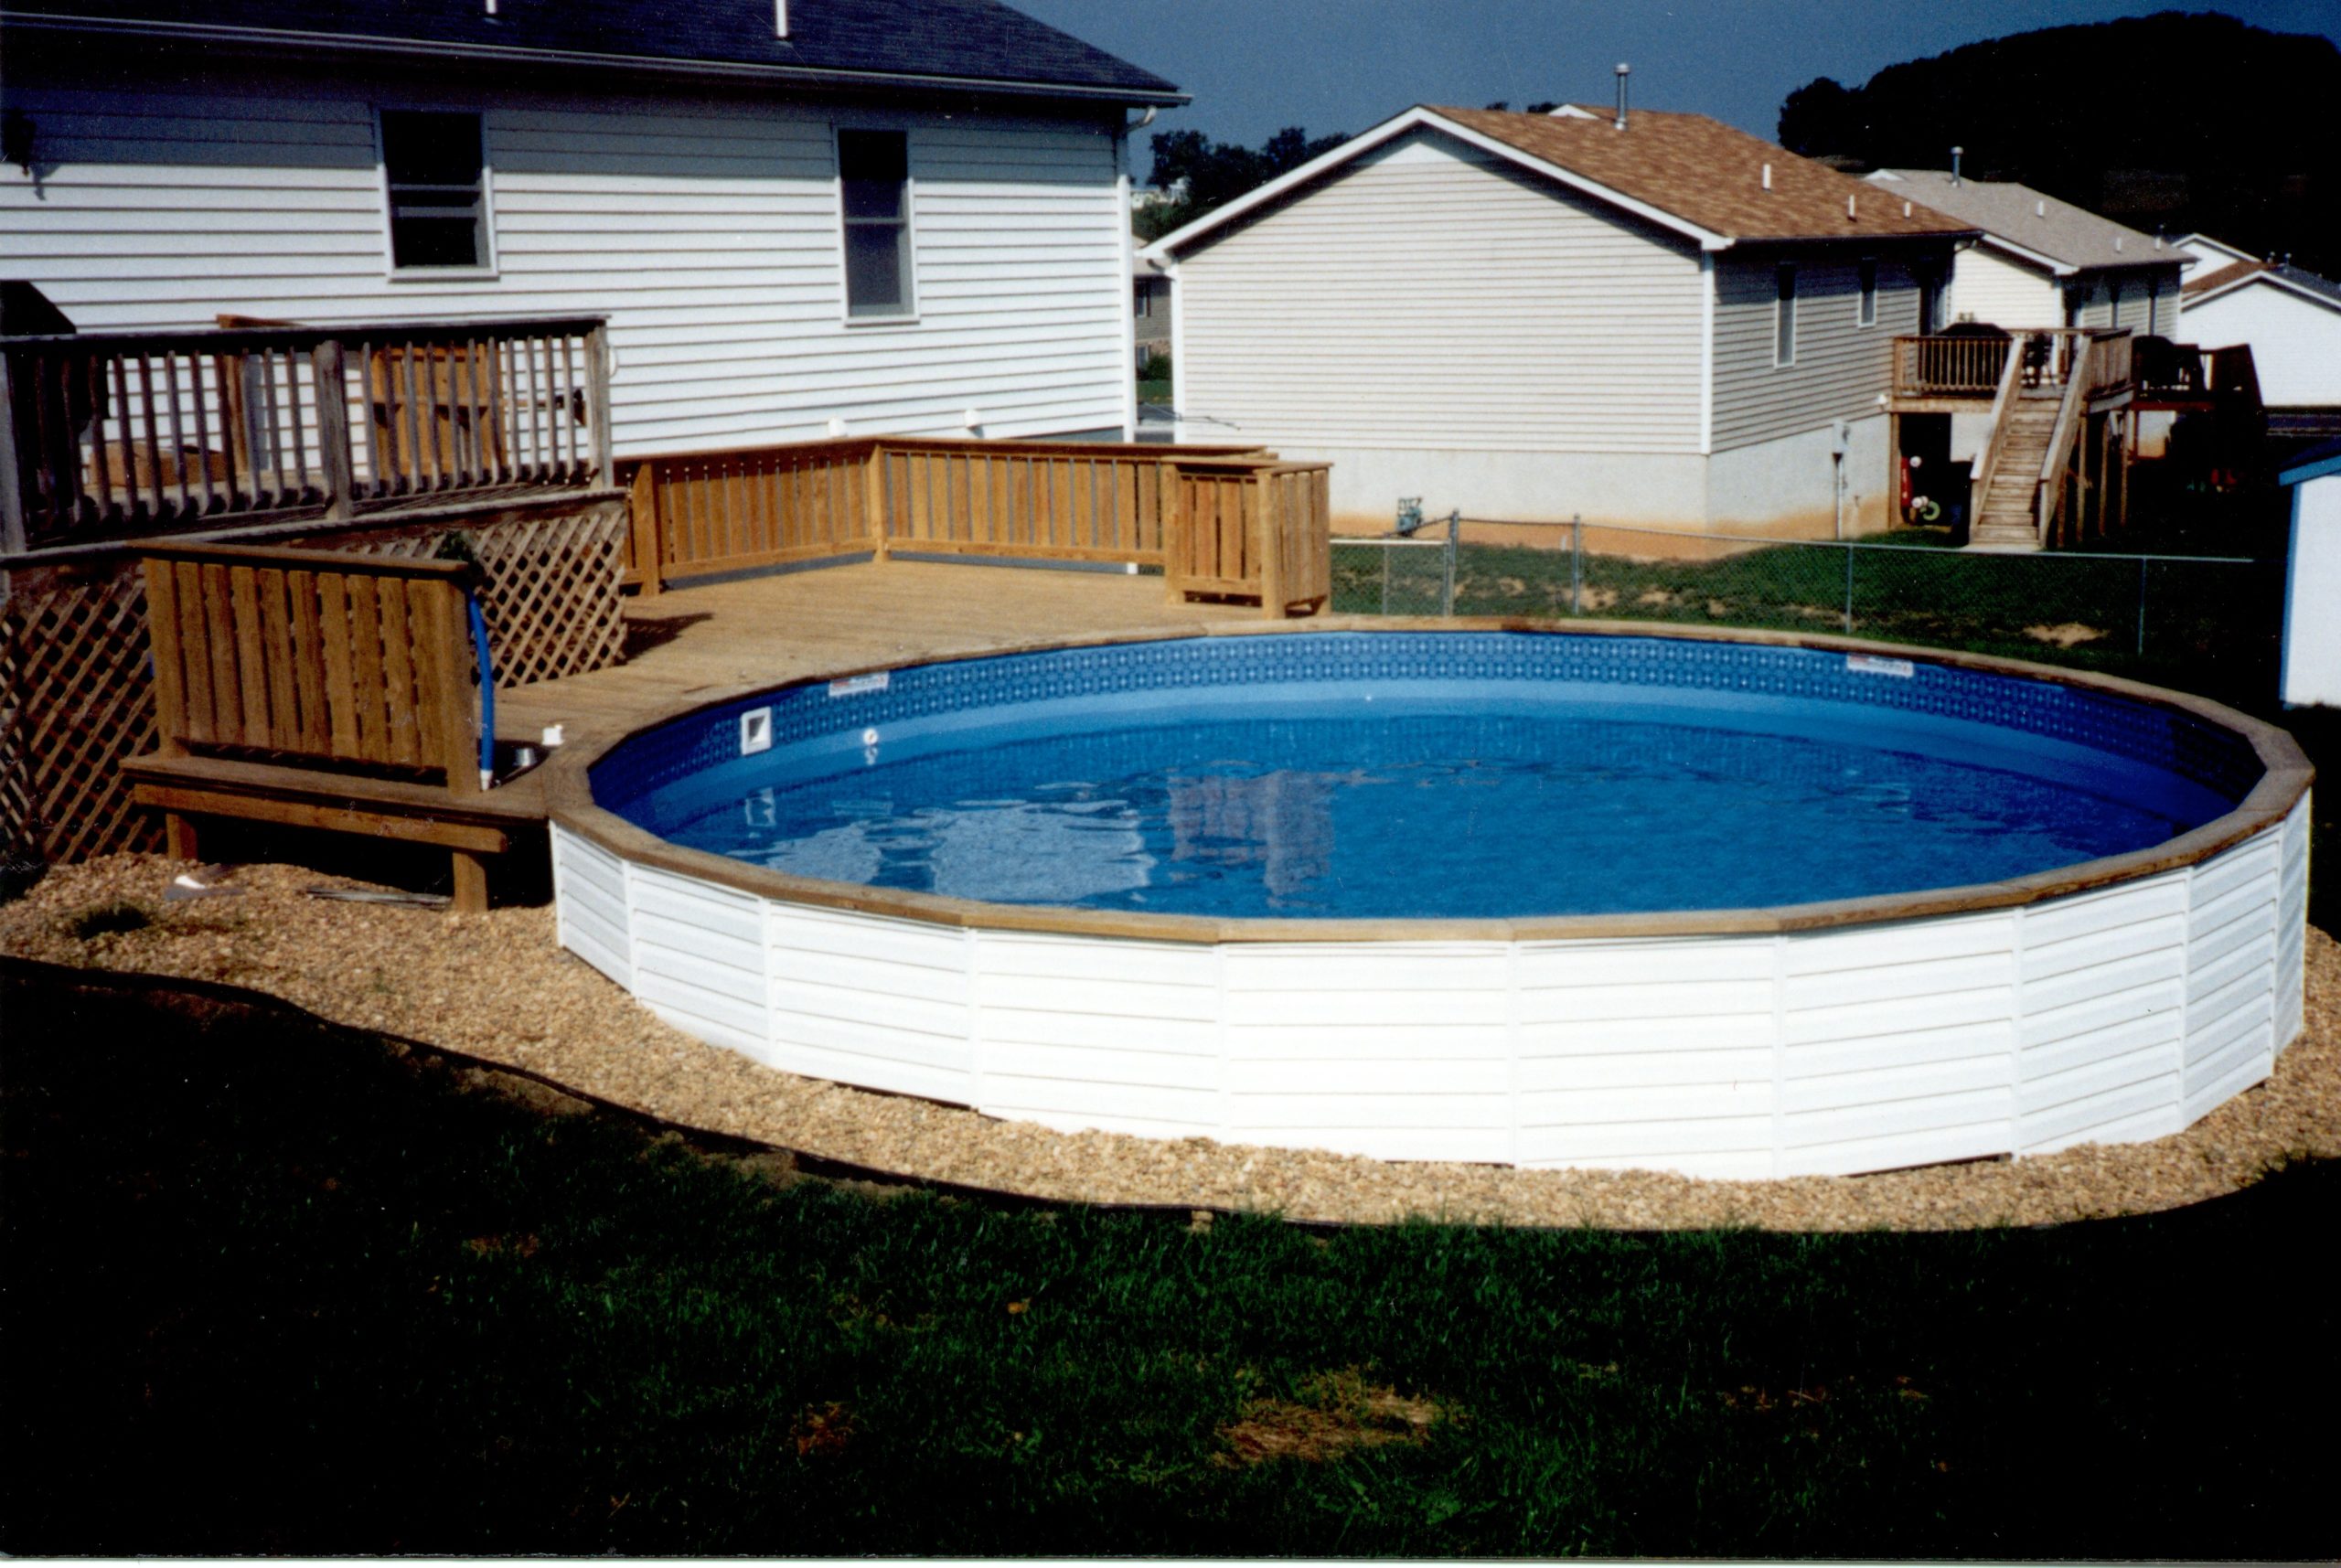 Medallion St. Croix above ground swimming pool installed into a hillside with vinyl siding, wood top cap, and wood deck.